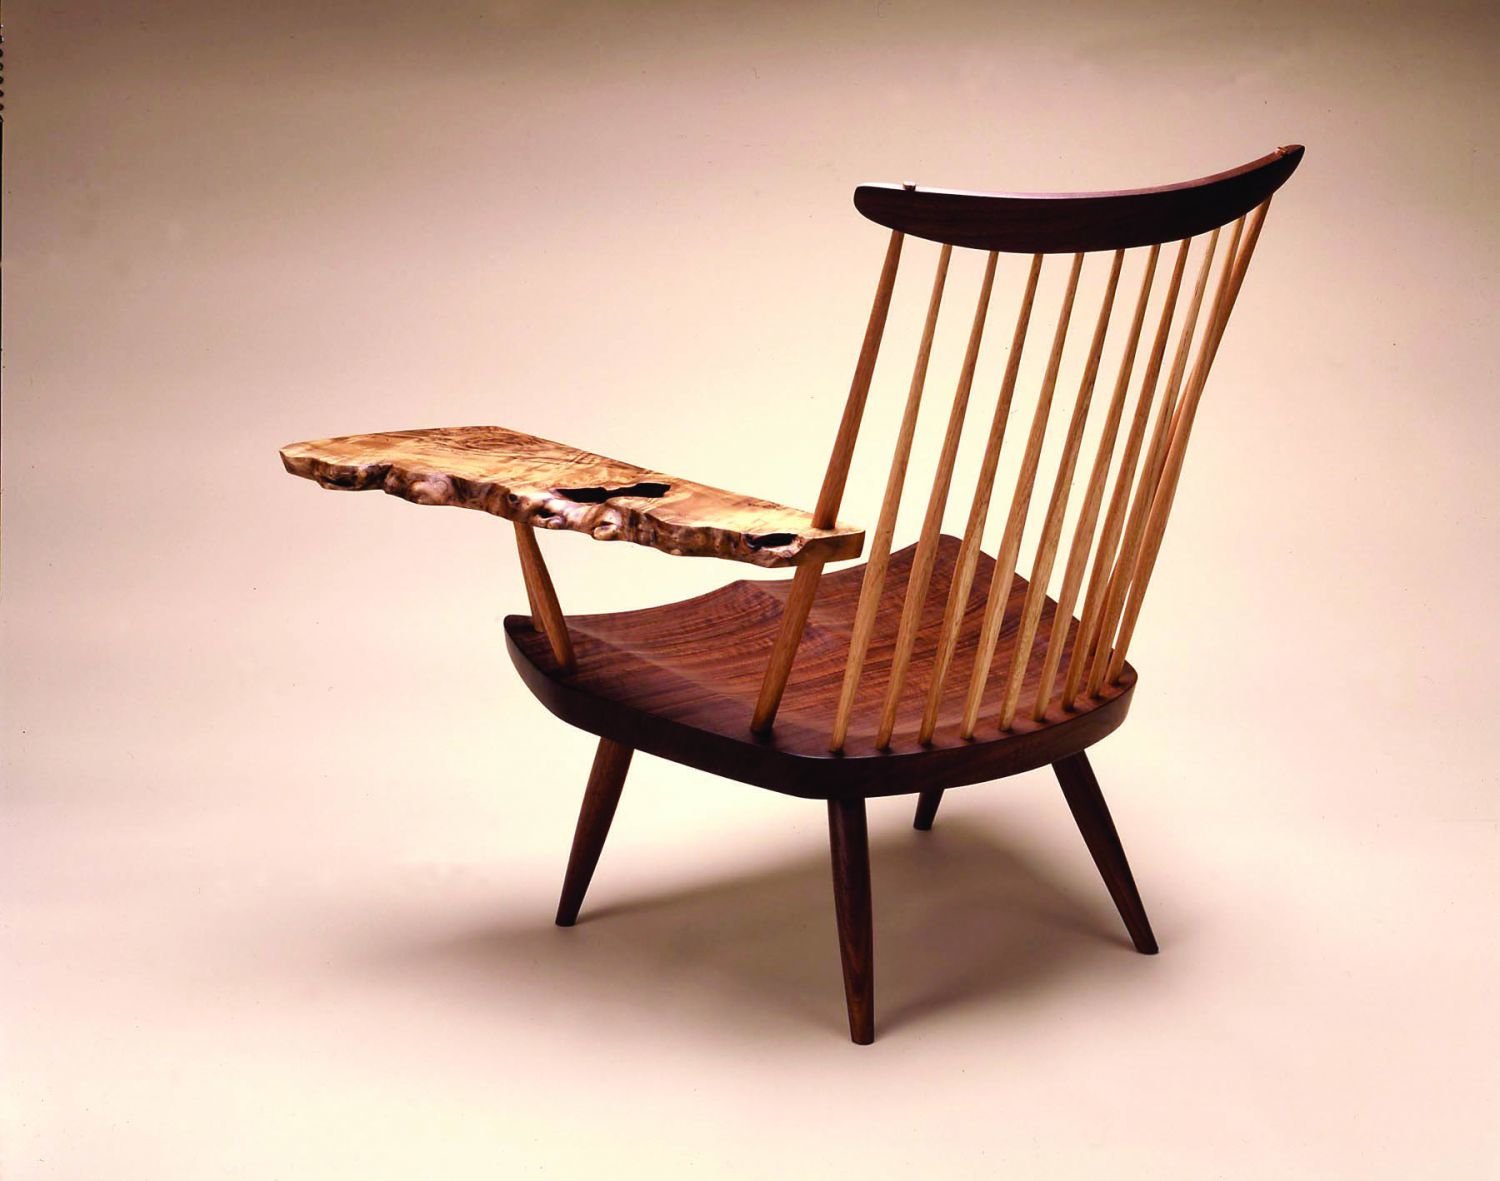 George Nakashima designed this Lounge Chair with Myrtle Burl Arm ca. 1962. It was made in 1989 by George Nakashima Woodworkers.